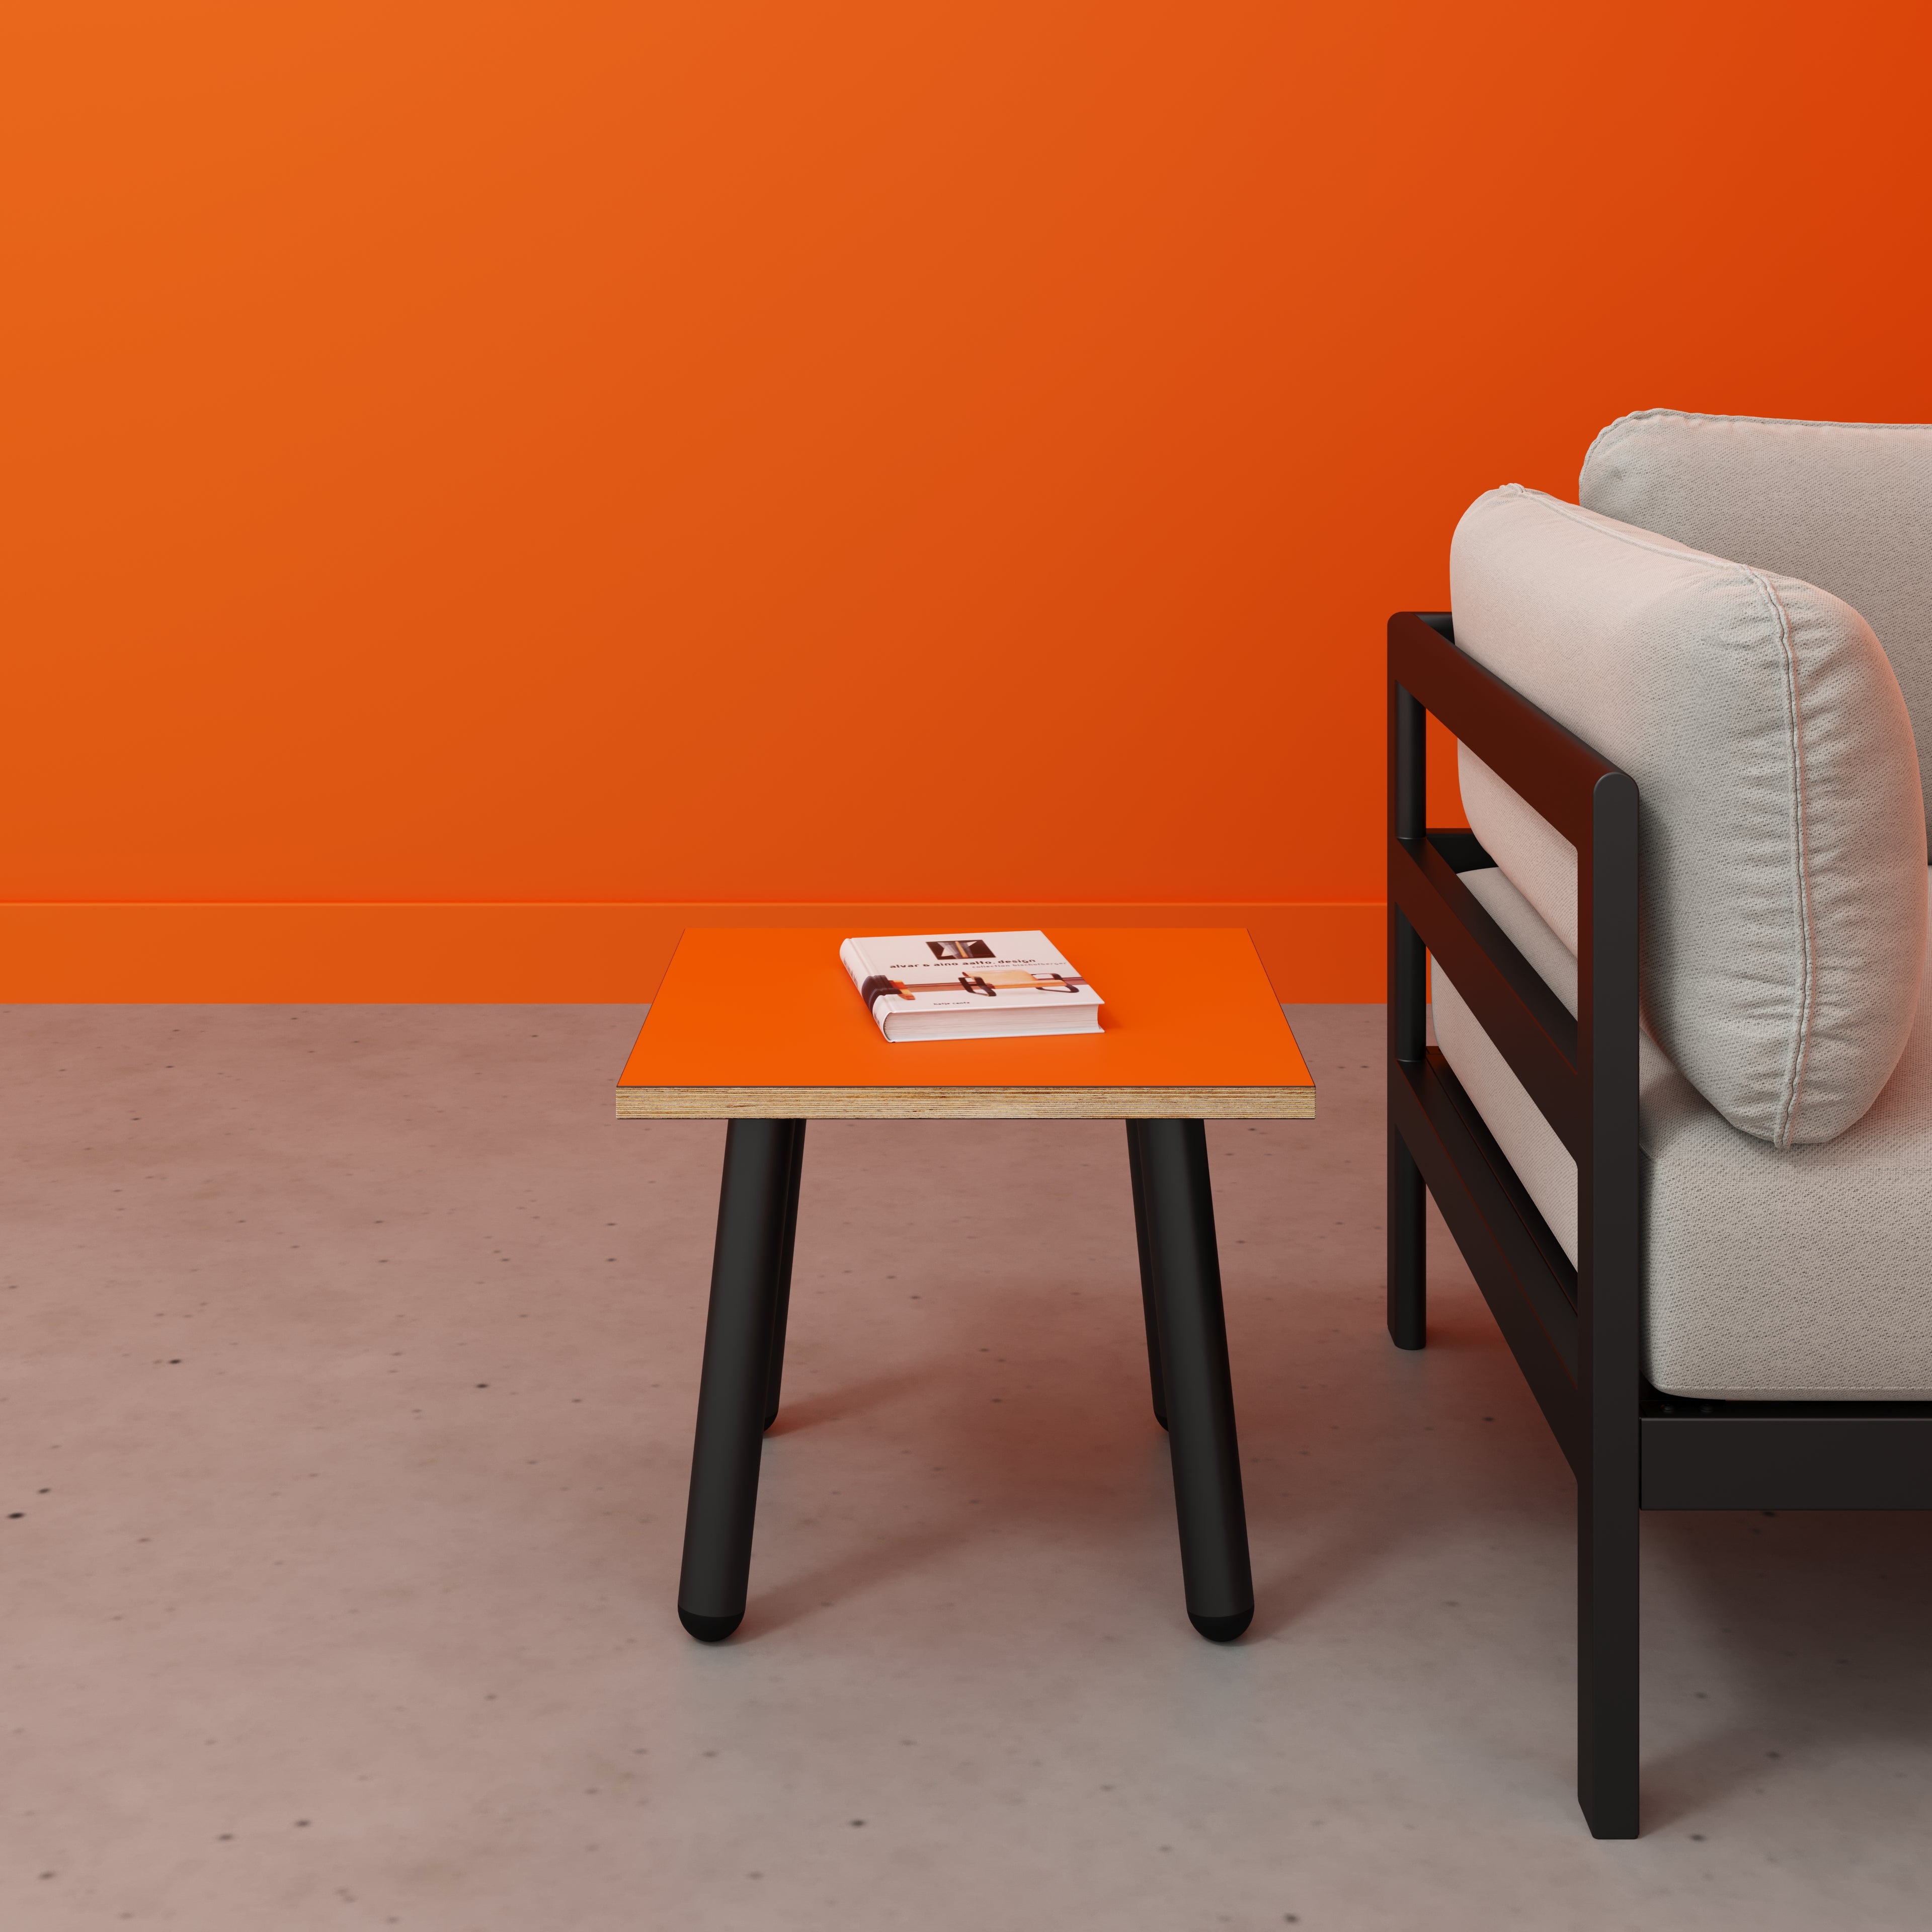 Side Table with Round Single Pin Legs - Formica Levante Orange - 500(w) x 500(d) x 425(h)